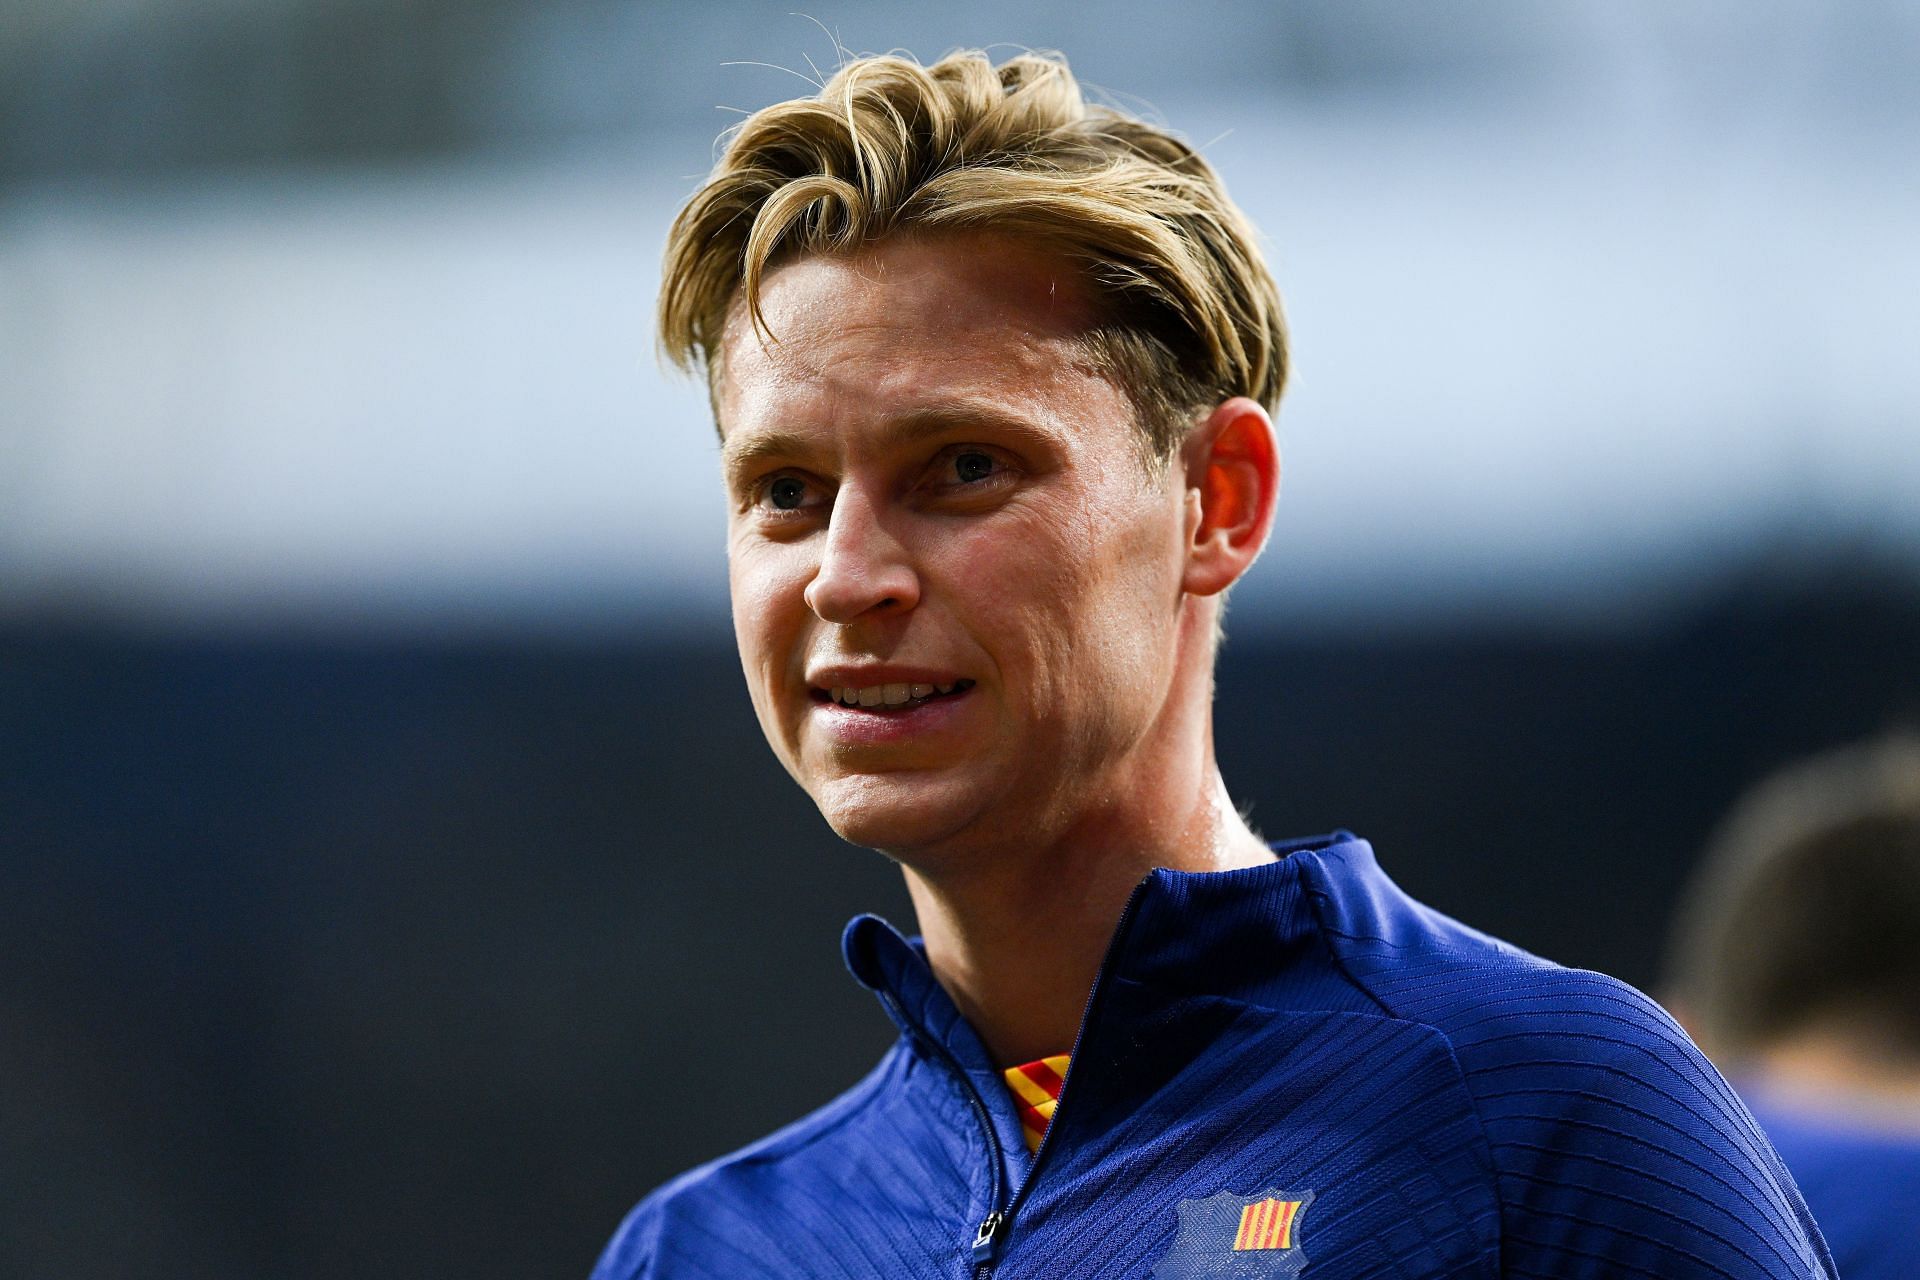 Frenkie de Jong has admirers at Old Trafford.